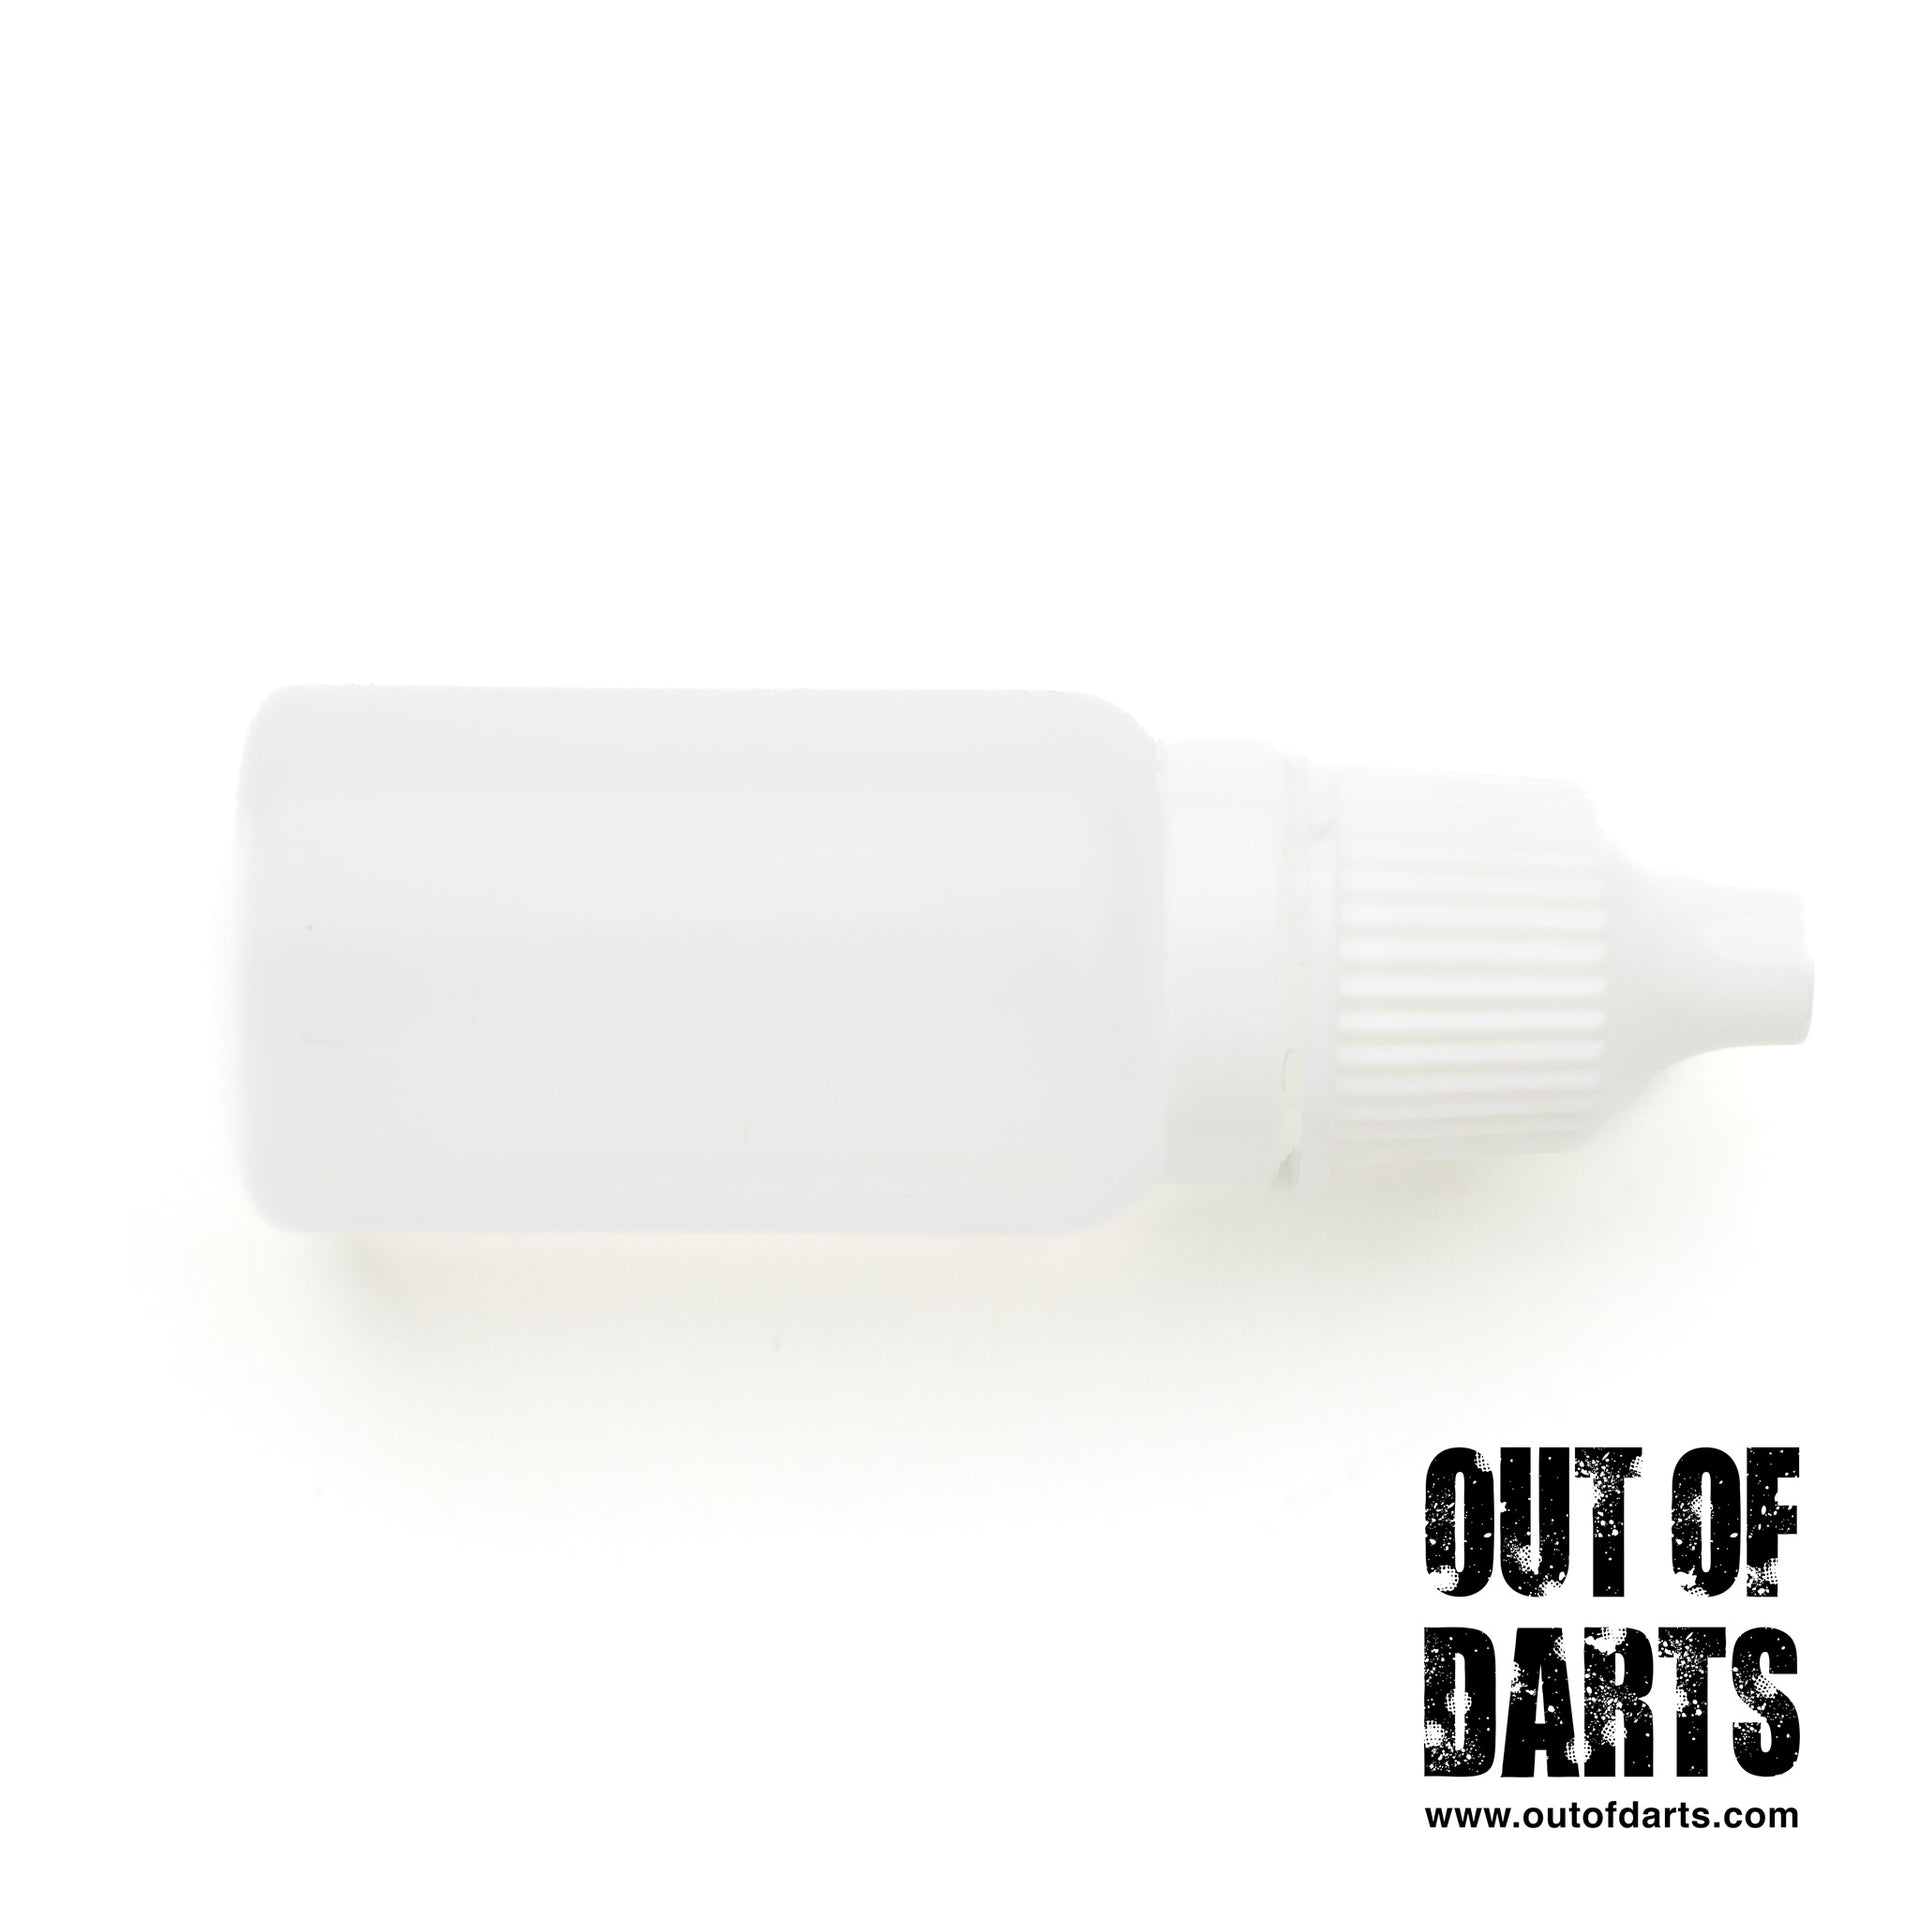 embout poï silicone - Olie's Darts